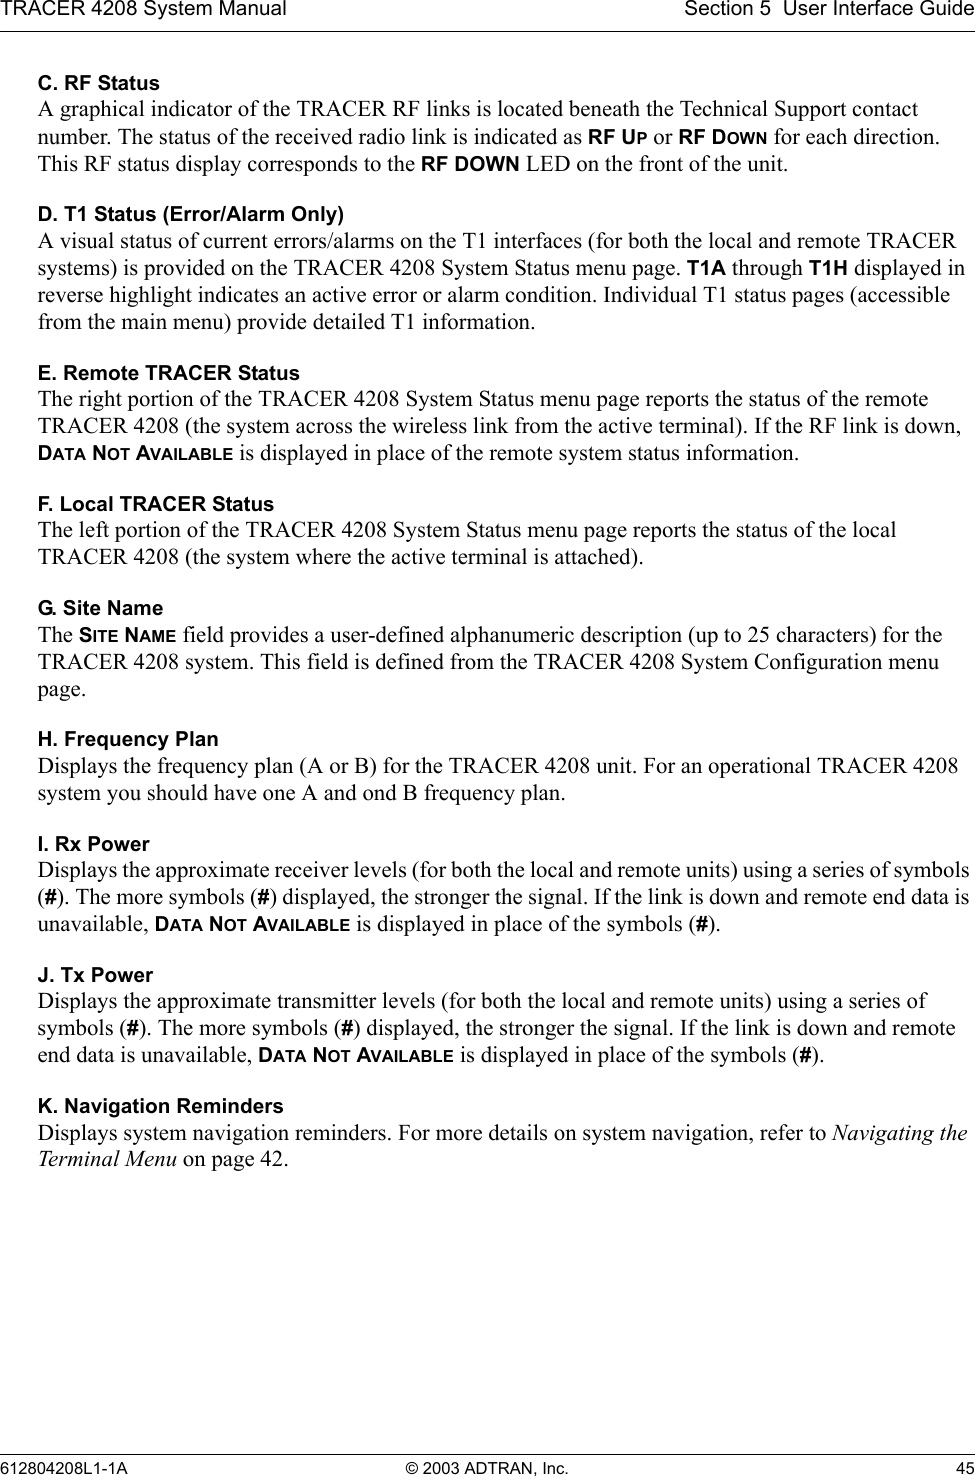 TRACER 4208 System Manual Section 5  User Interface Guide612804208L1-1A © 2003 ADTRAN, Inc. 45C. RF StatusA graphical indicator of the TRACER RF links is located beneath the Technical Support contact number. The status of the received radio link is indicated as RF UP or RF DOWN for each direction. This RF status display corresponds to the RF DOWN LED on the front of the unit.D. T1 Status (Error/Alarm Only)A visual status of current errors/alarms on the T1 interfaces (for both the local and remote TRACER systems) is provided on the TRACER 4208 System Status menu page. T1A through T1H displayed in reverse highlight indicates an active error or alarm condition. Individual T1 status pages (accessible from the main menu) provide detailed T1 information.E. Remote TRACER StatusThe right portion of the TRACER 4208 System Status menu page reports the status of the remote TRACER 4208 (the system across the wireless link from the active terminal). If the RF link is down, DATA NOT AVAILABLE is displayed in place of the remote system status information.F. Local TRACER StatusThe left portion of the TRACER 4208 System Status menu page reports the status of the local TRACER 4208 (the system where the active terminal is attached). G. S i t e N a m eThe SITE NAME field provides a user-defined alphanumeric description (up to 25 characters) for the TRACER 4208 system. This field is defined from the TRACER 4208 System Configuration menu page.H. Frequency PlanDisplays the frequency plan (A or B) for the TRACER 4208 unit. For an operational TRACER 4208 system you should have one A and ond B frequency plan.I. Rx PowerDisplays the approximate receiver levels (for both the local and remote units) using a series of symbols (#). The more symbols (#) displayed, the stronger the signal. If the link is down and remote end data is unavailable, DATA NOT AVAILABLE is displayed in place of the symbols (#).J. Tx PowerDisplays the approximate transmitter levels (for both the local and remote units) using a series of symbols (#). The more symbols (#) displayed, the stronger the signal. If the link is down and remote end data is unavailable, DATA NOT AVAILABLE is displayed in place of the symbols (#).K. Navigation RemindersDisplays system navigation reminders. For more details on system navigation, refer to Navigating the Terminal Menu on page 42. 